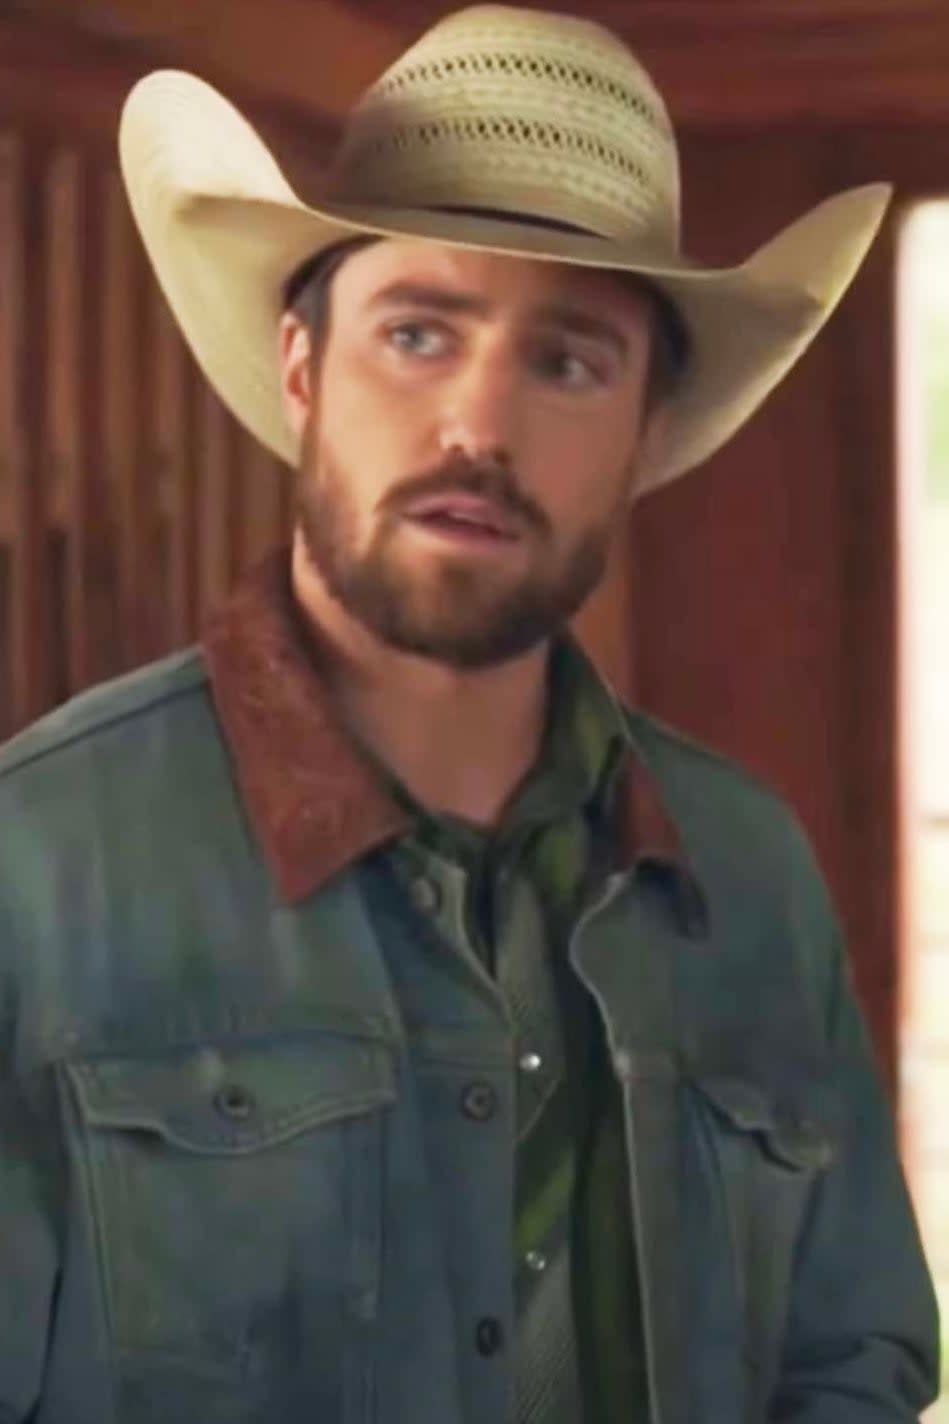 Spencer Lord in Heartland in cowboy attire with hat and denim jacket, in a rustic setting